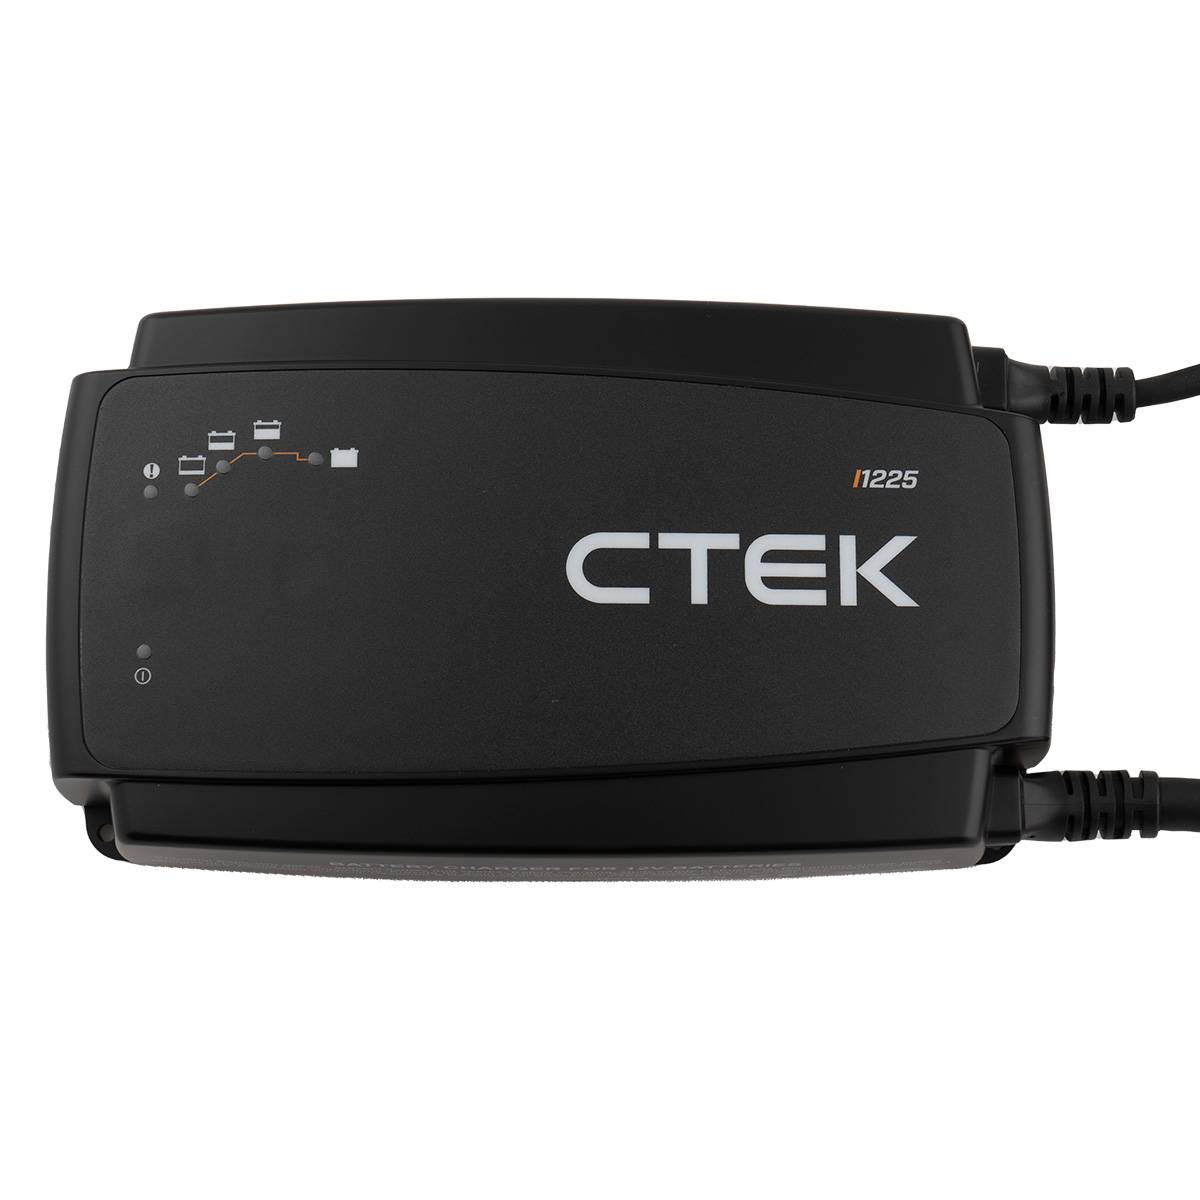 CTEK I1225 EU charger 25A for 12V batteries, Chargers, Boots & Marine, Batteries by application